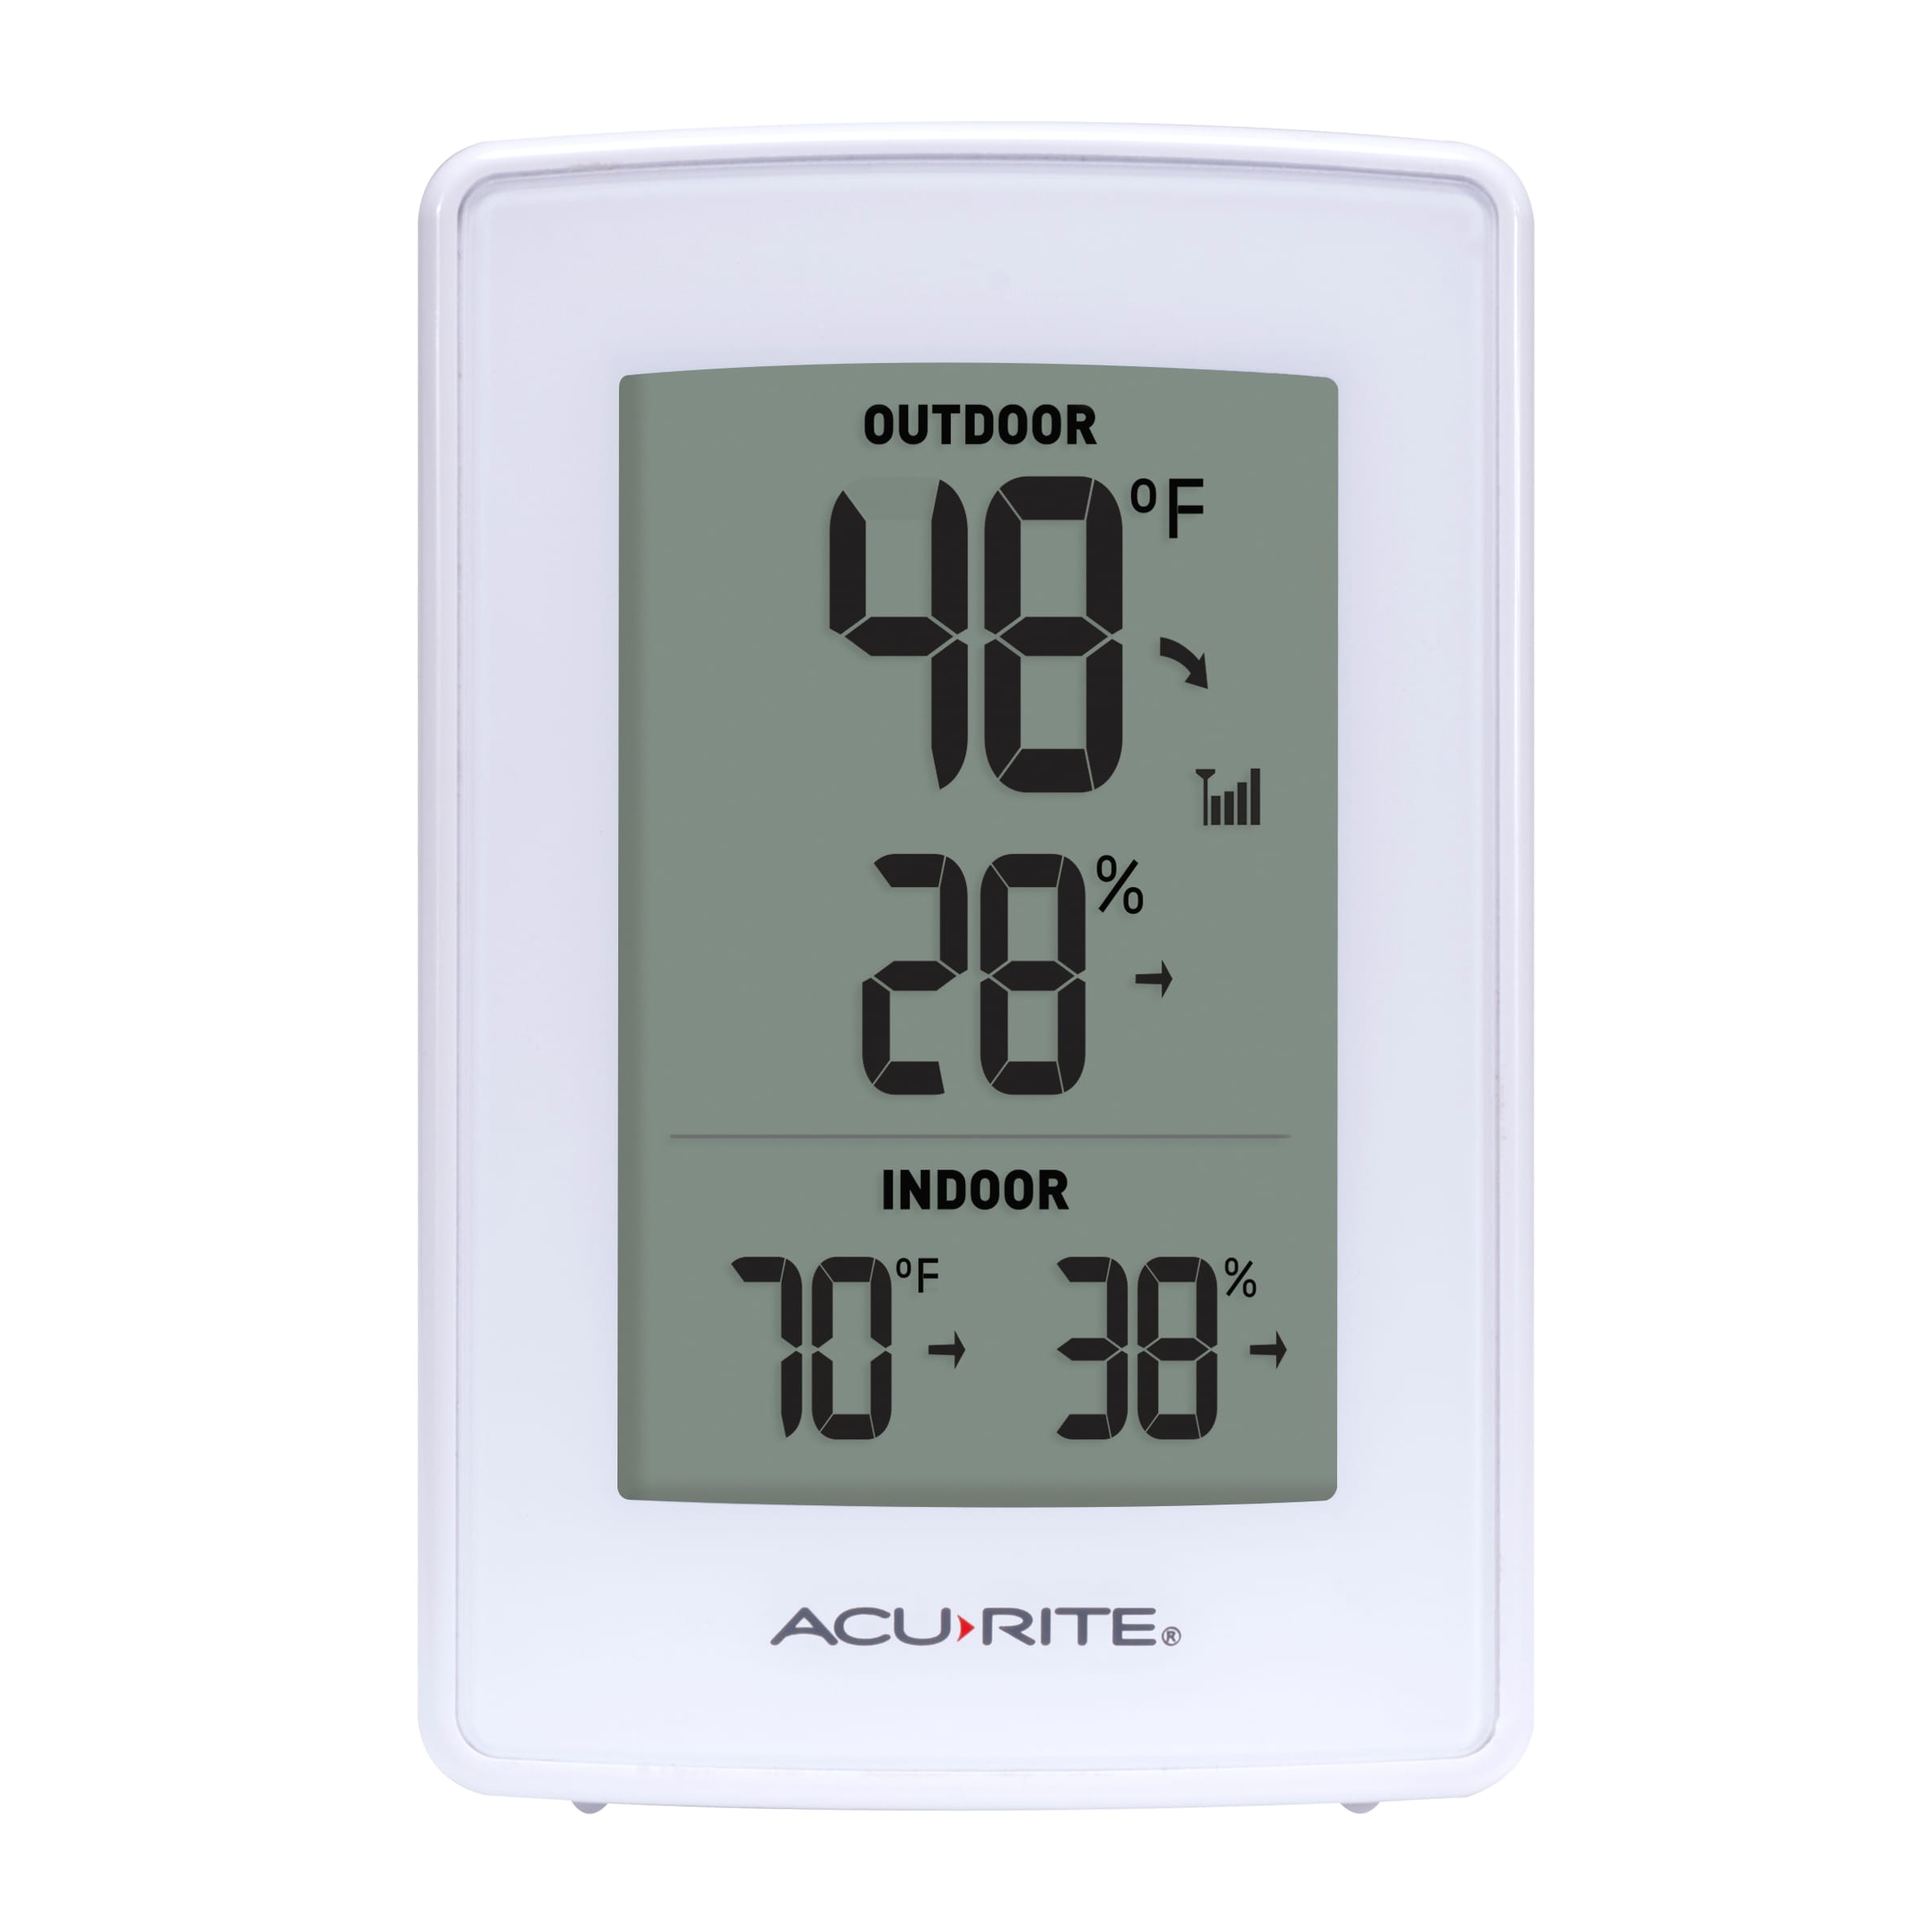 Limited Edition Taylor Wired Digital Indoor/Outdoor Thermometer